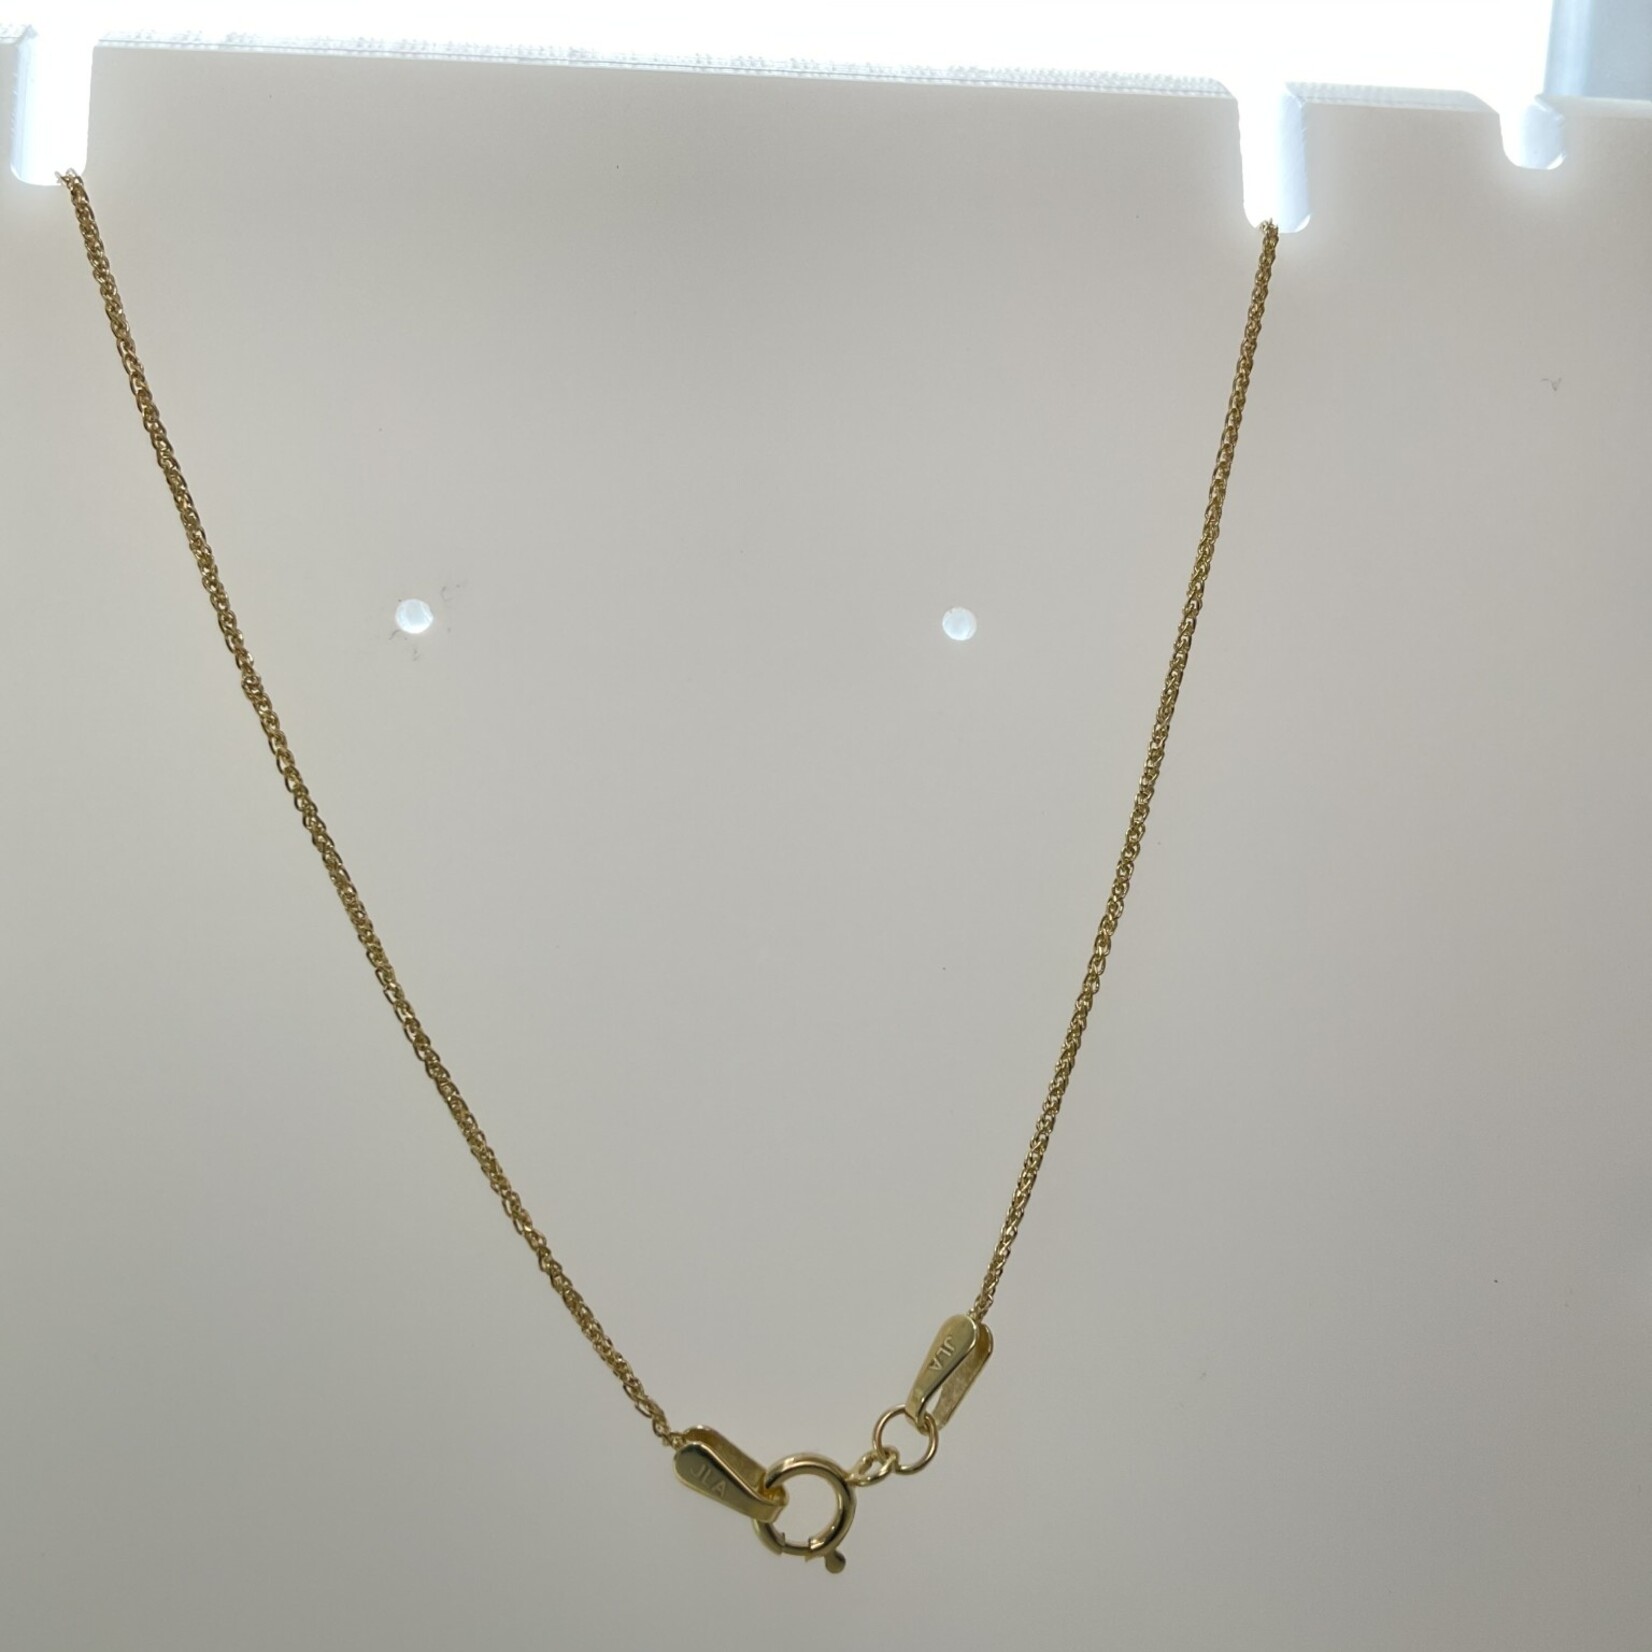 14 Kt Yellow Gold Chain 20"